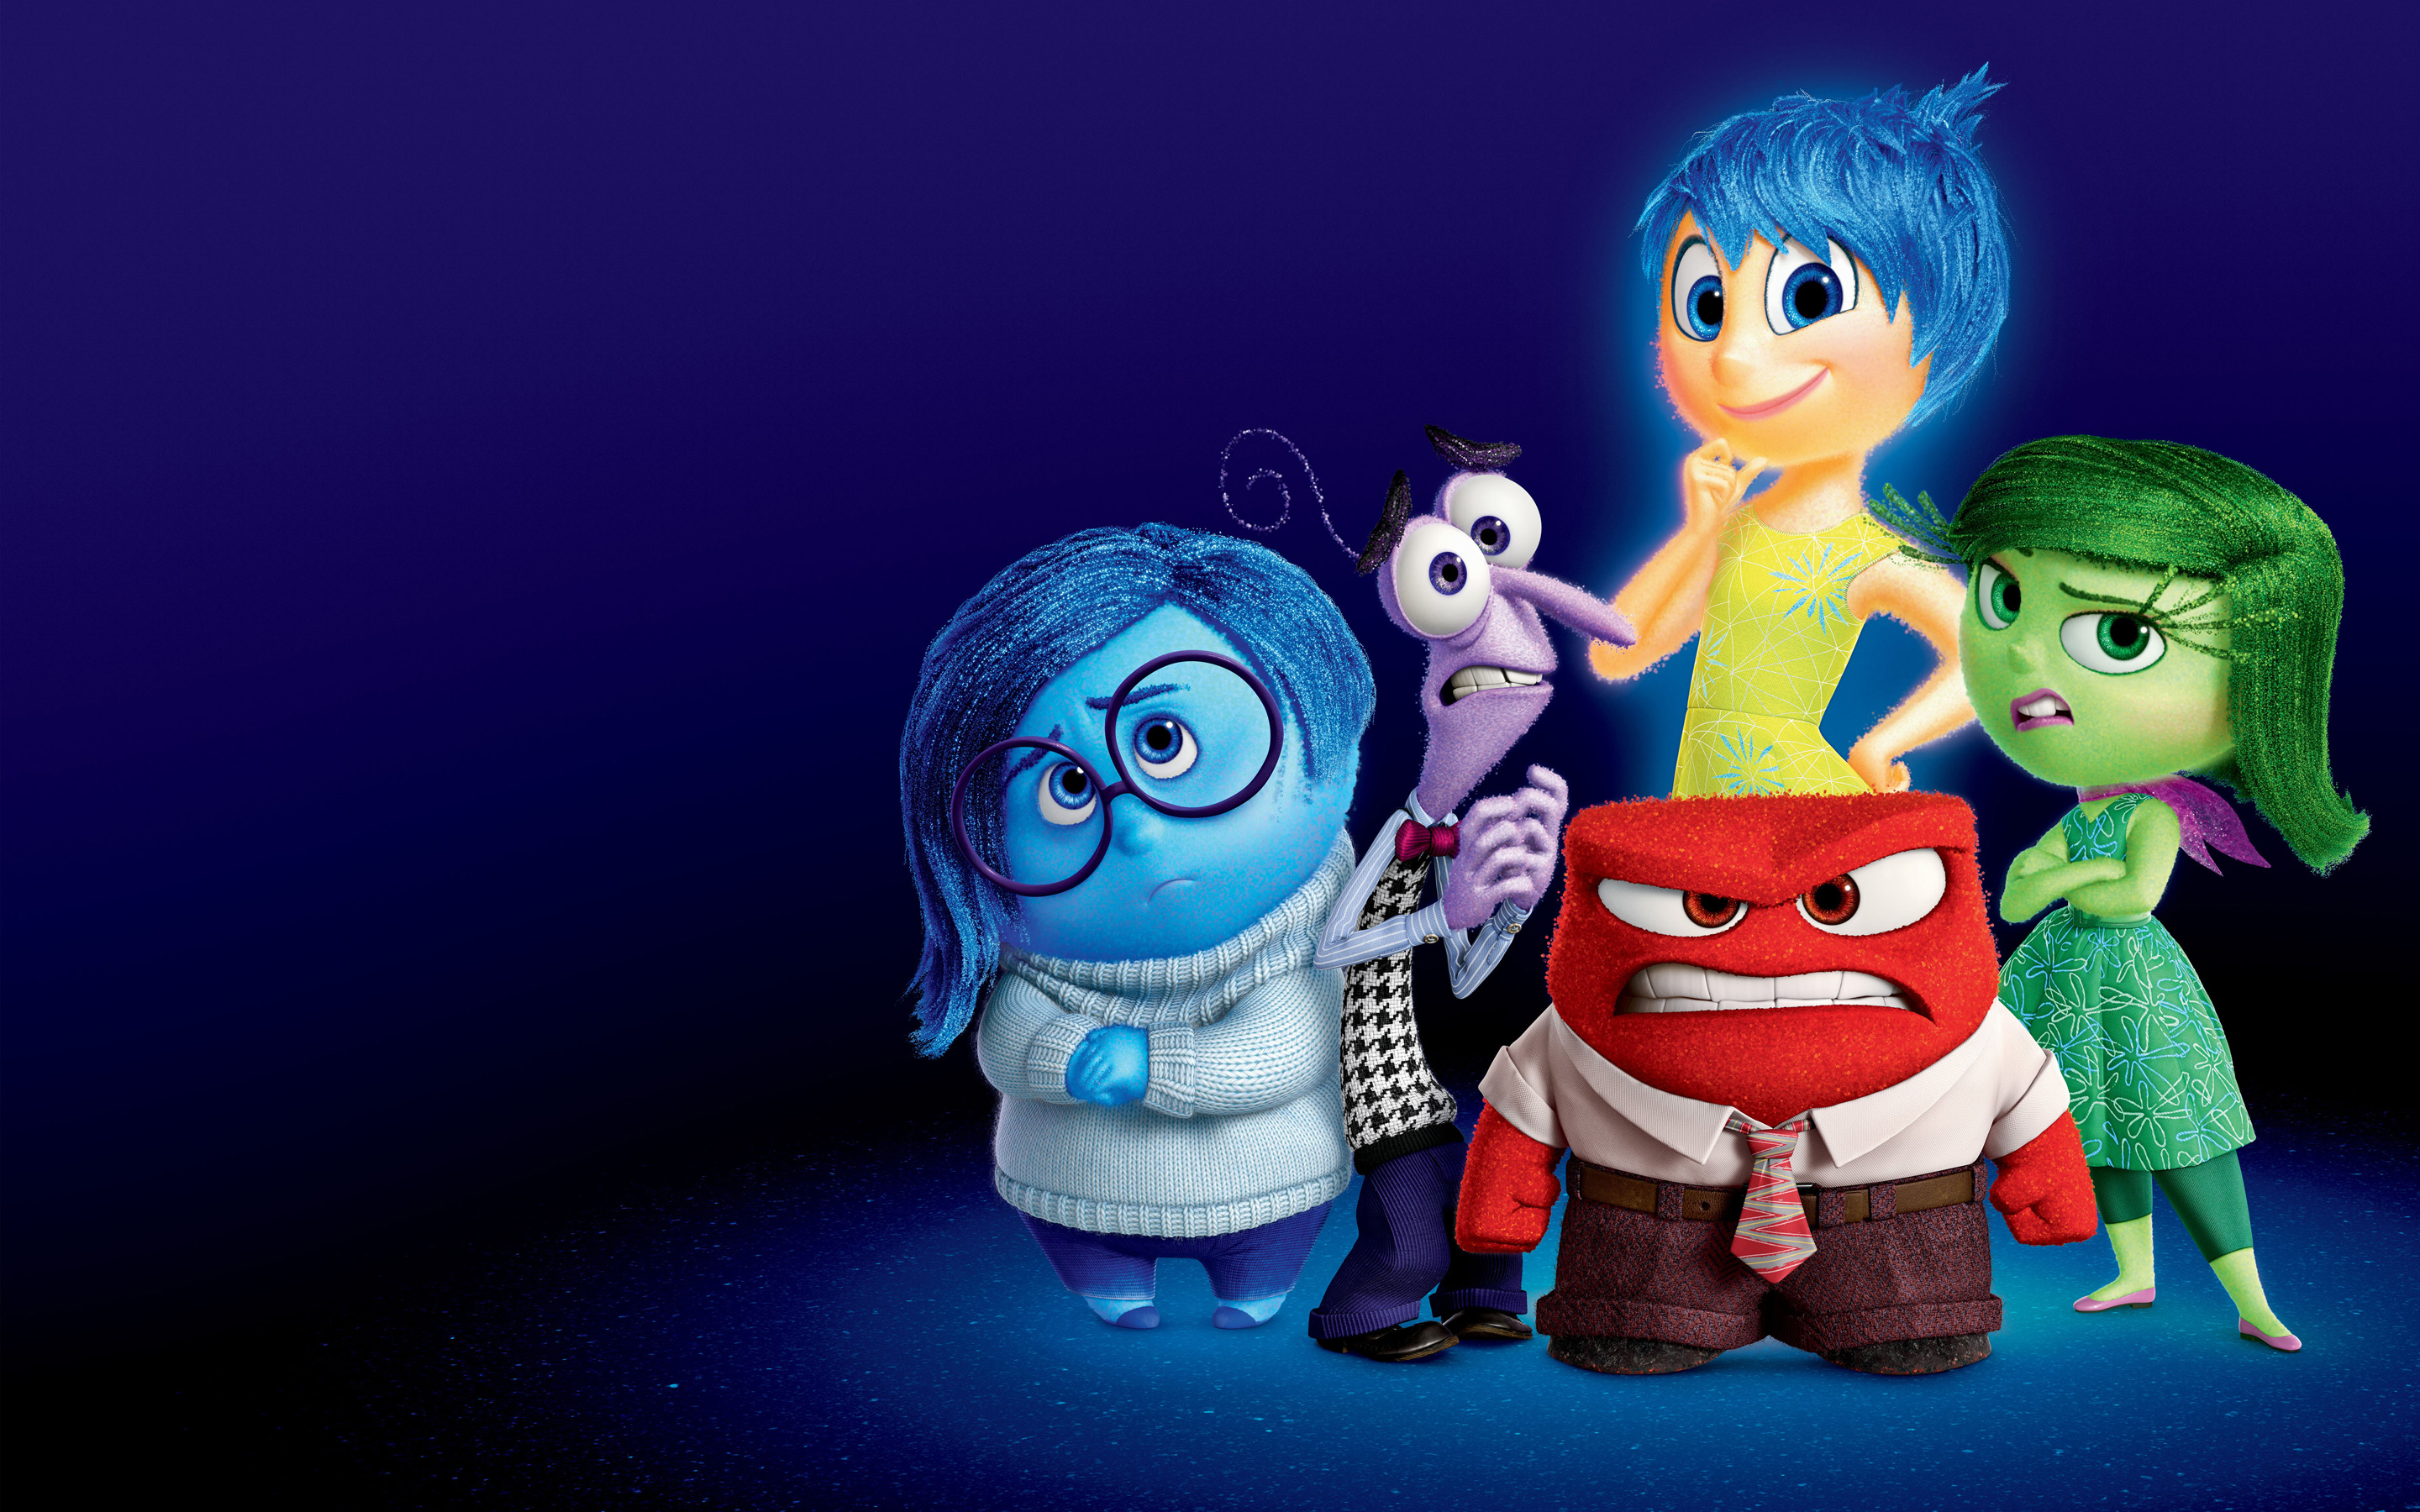 Inside Out Movie Wallpaper HD